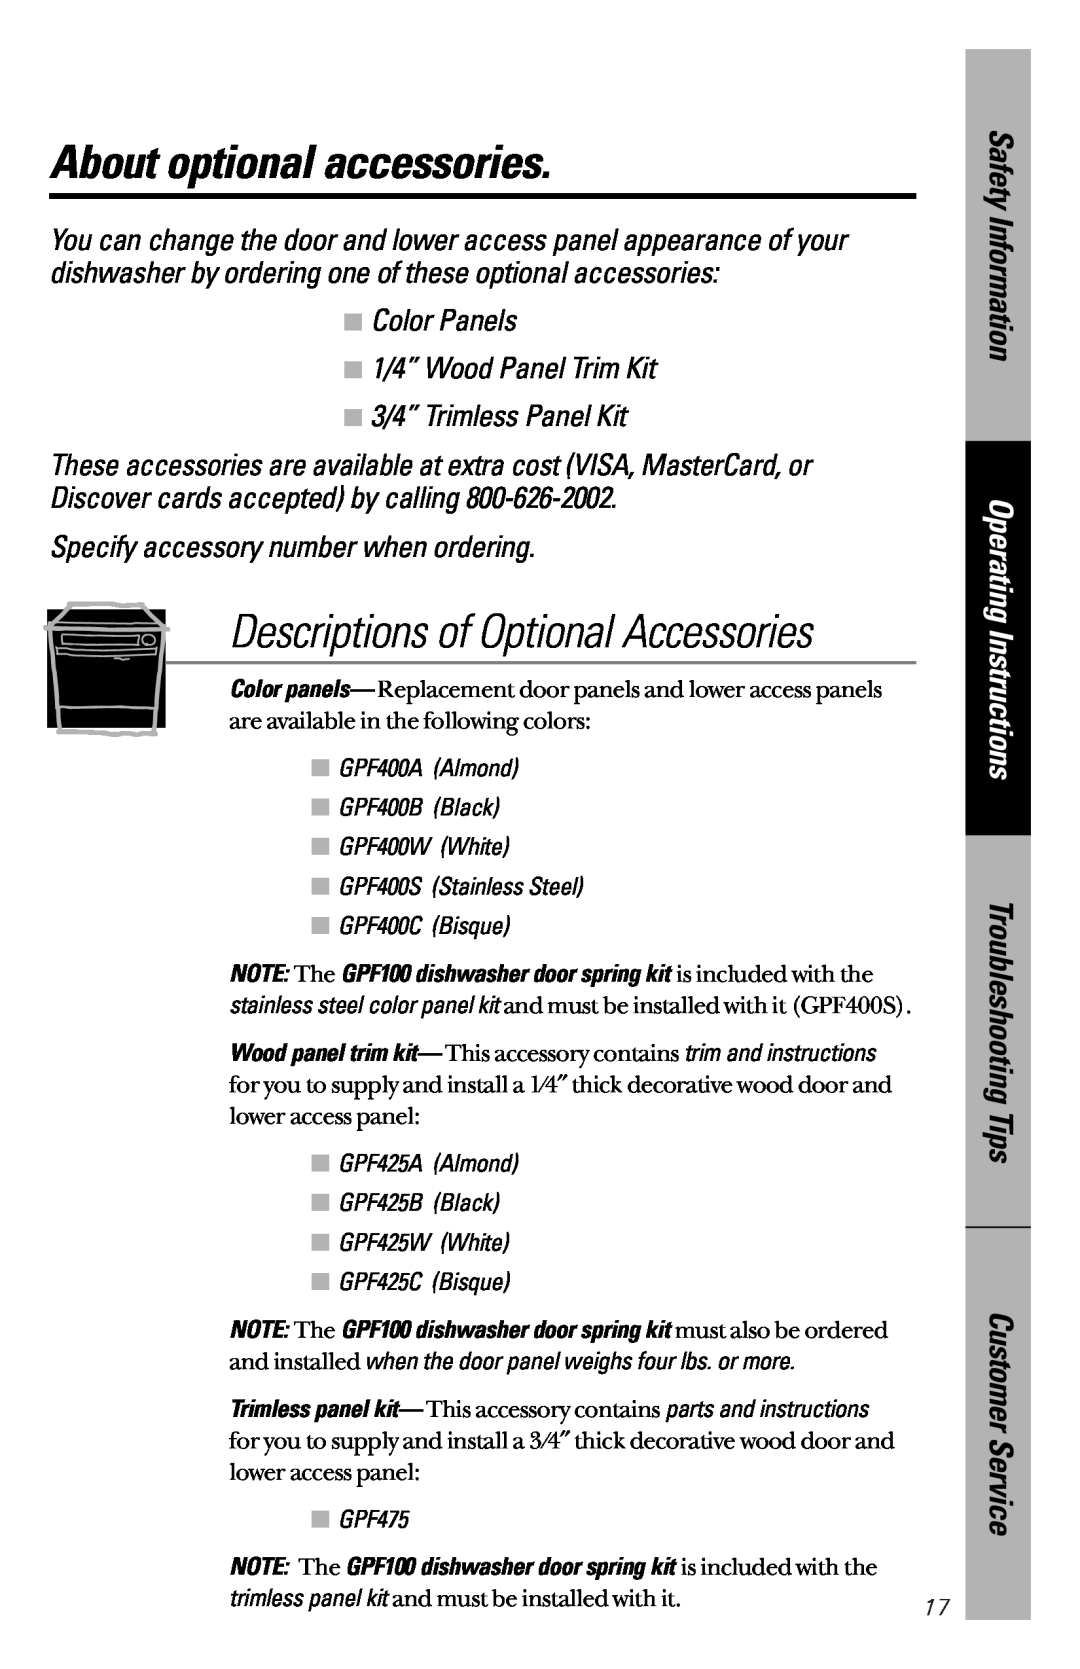 GE GSDL322 About optional accessories, Descriptions of Optional Accessories, Color Panels 1/4” Wood Panel Trim Kit 